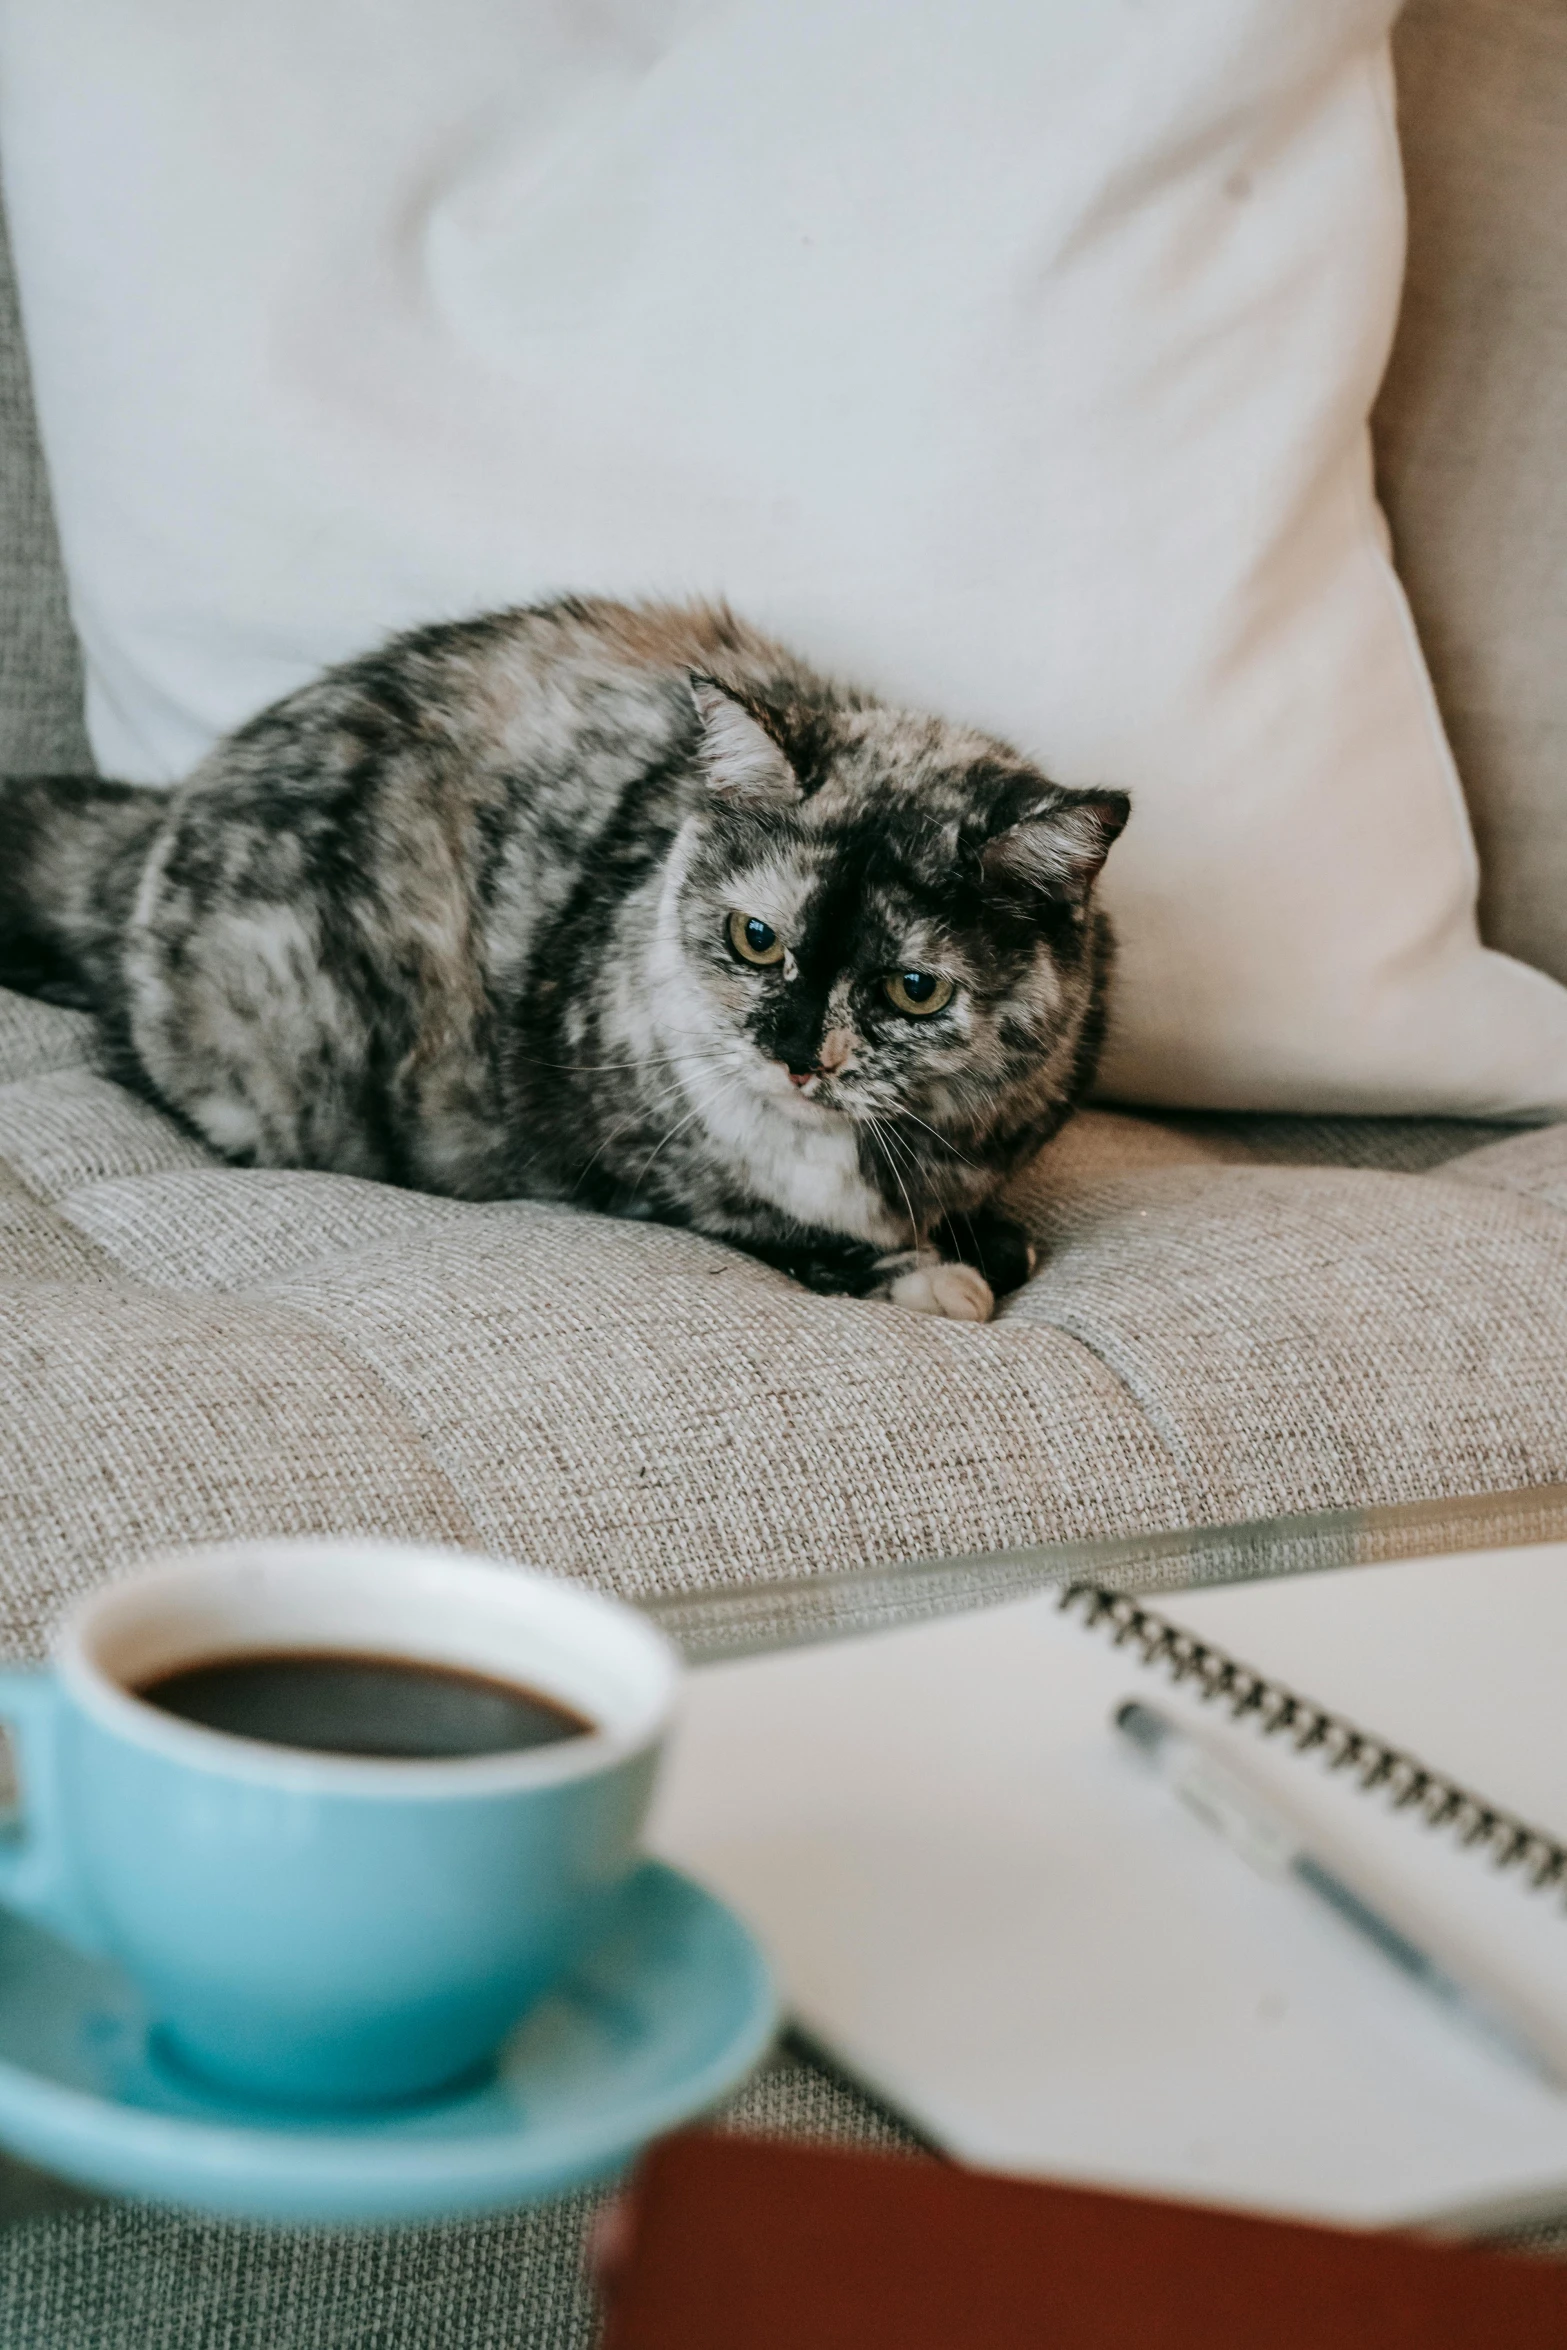 a cat sitting on a couch next to a cup of coffee, sitting on a desk, jen atkin, 2019 trending photo, grey-eyed